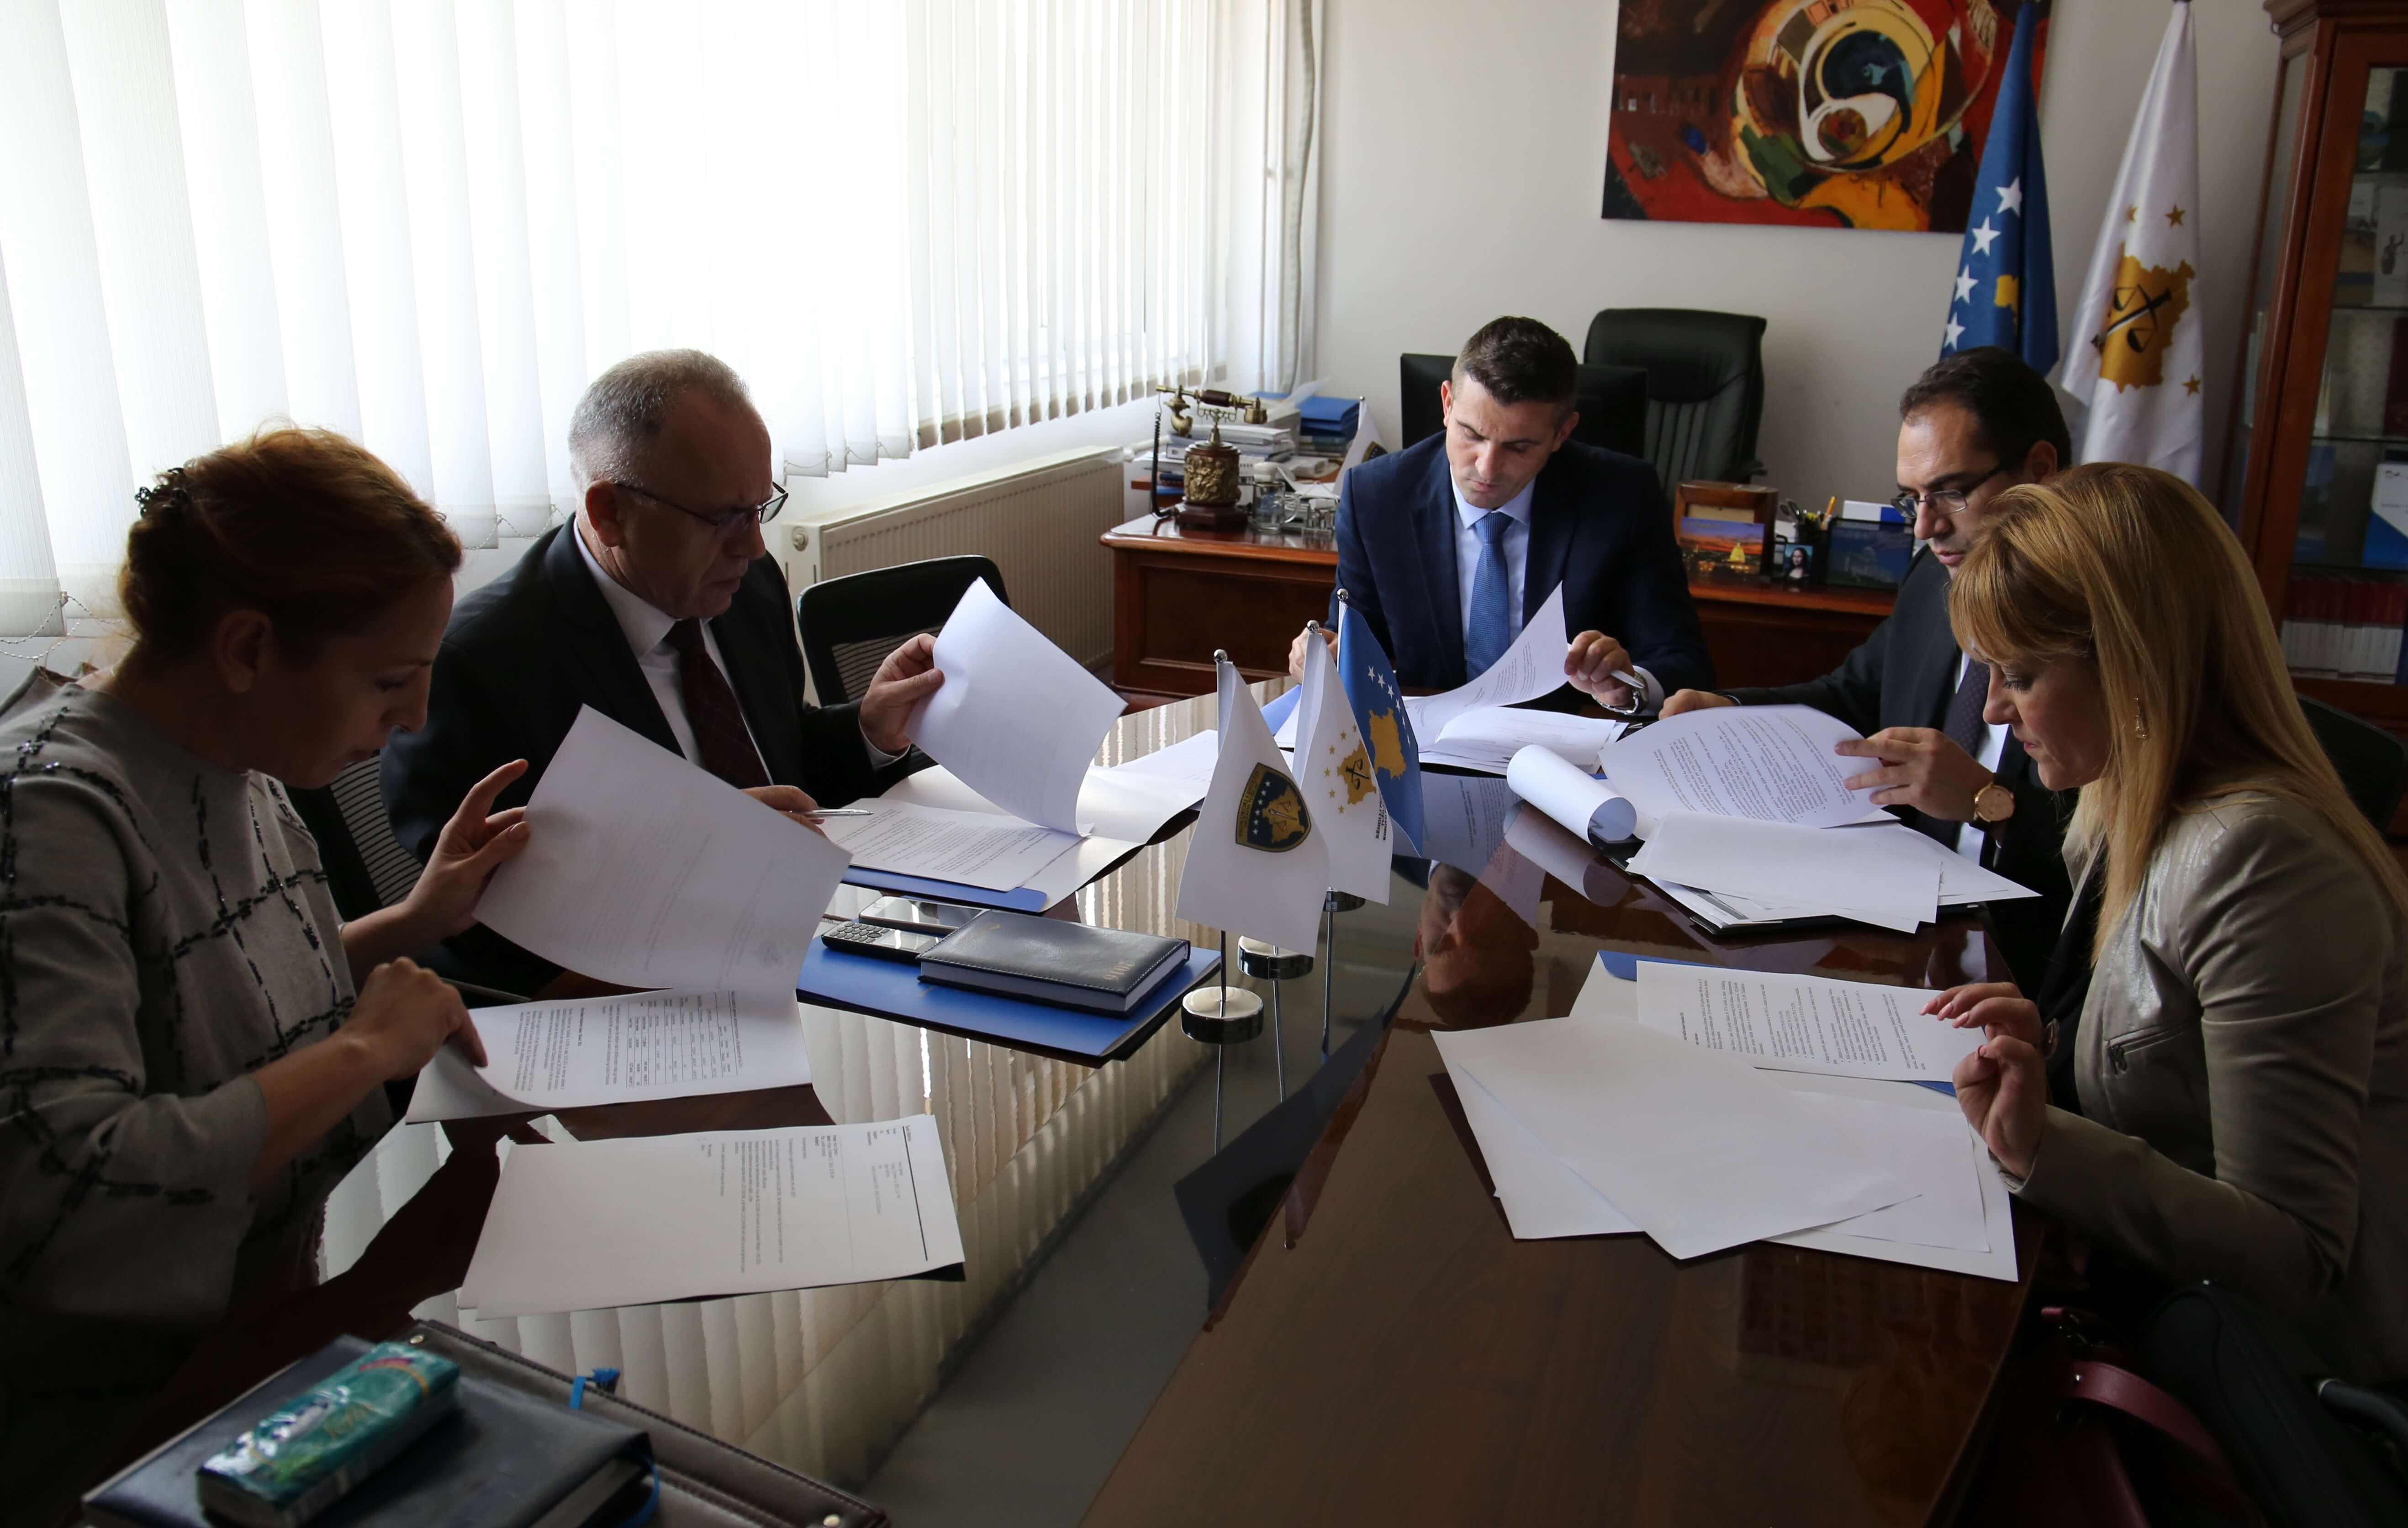 There was held the next meeting of the Committee for Budget, Finances and Staff